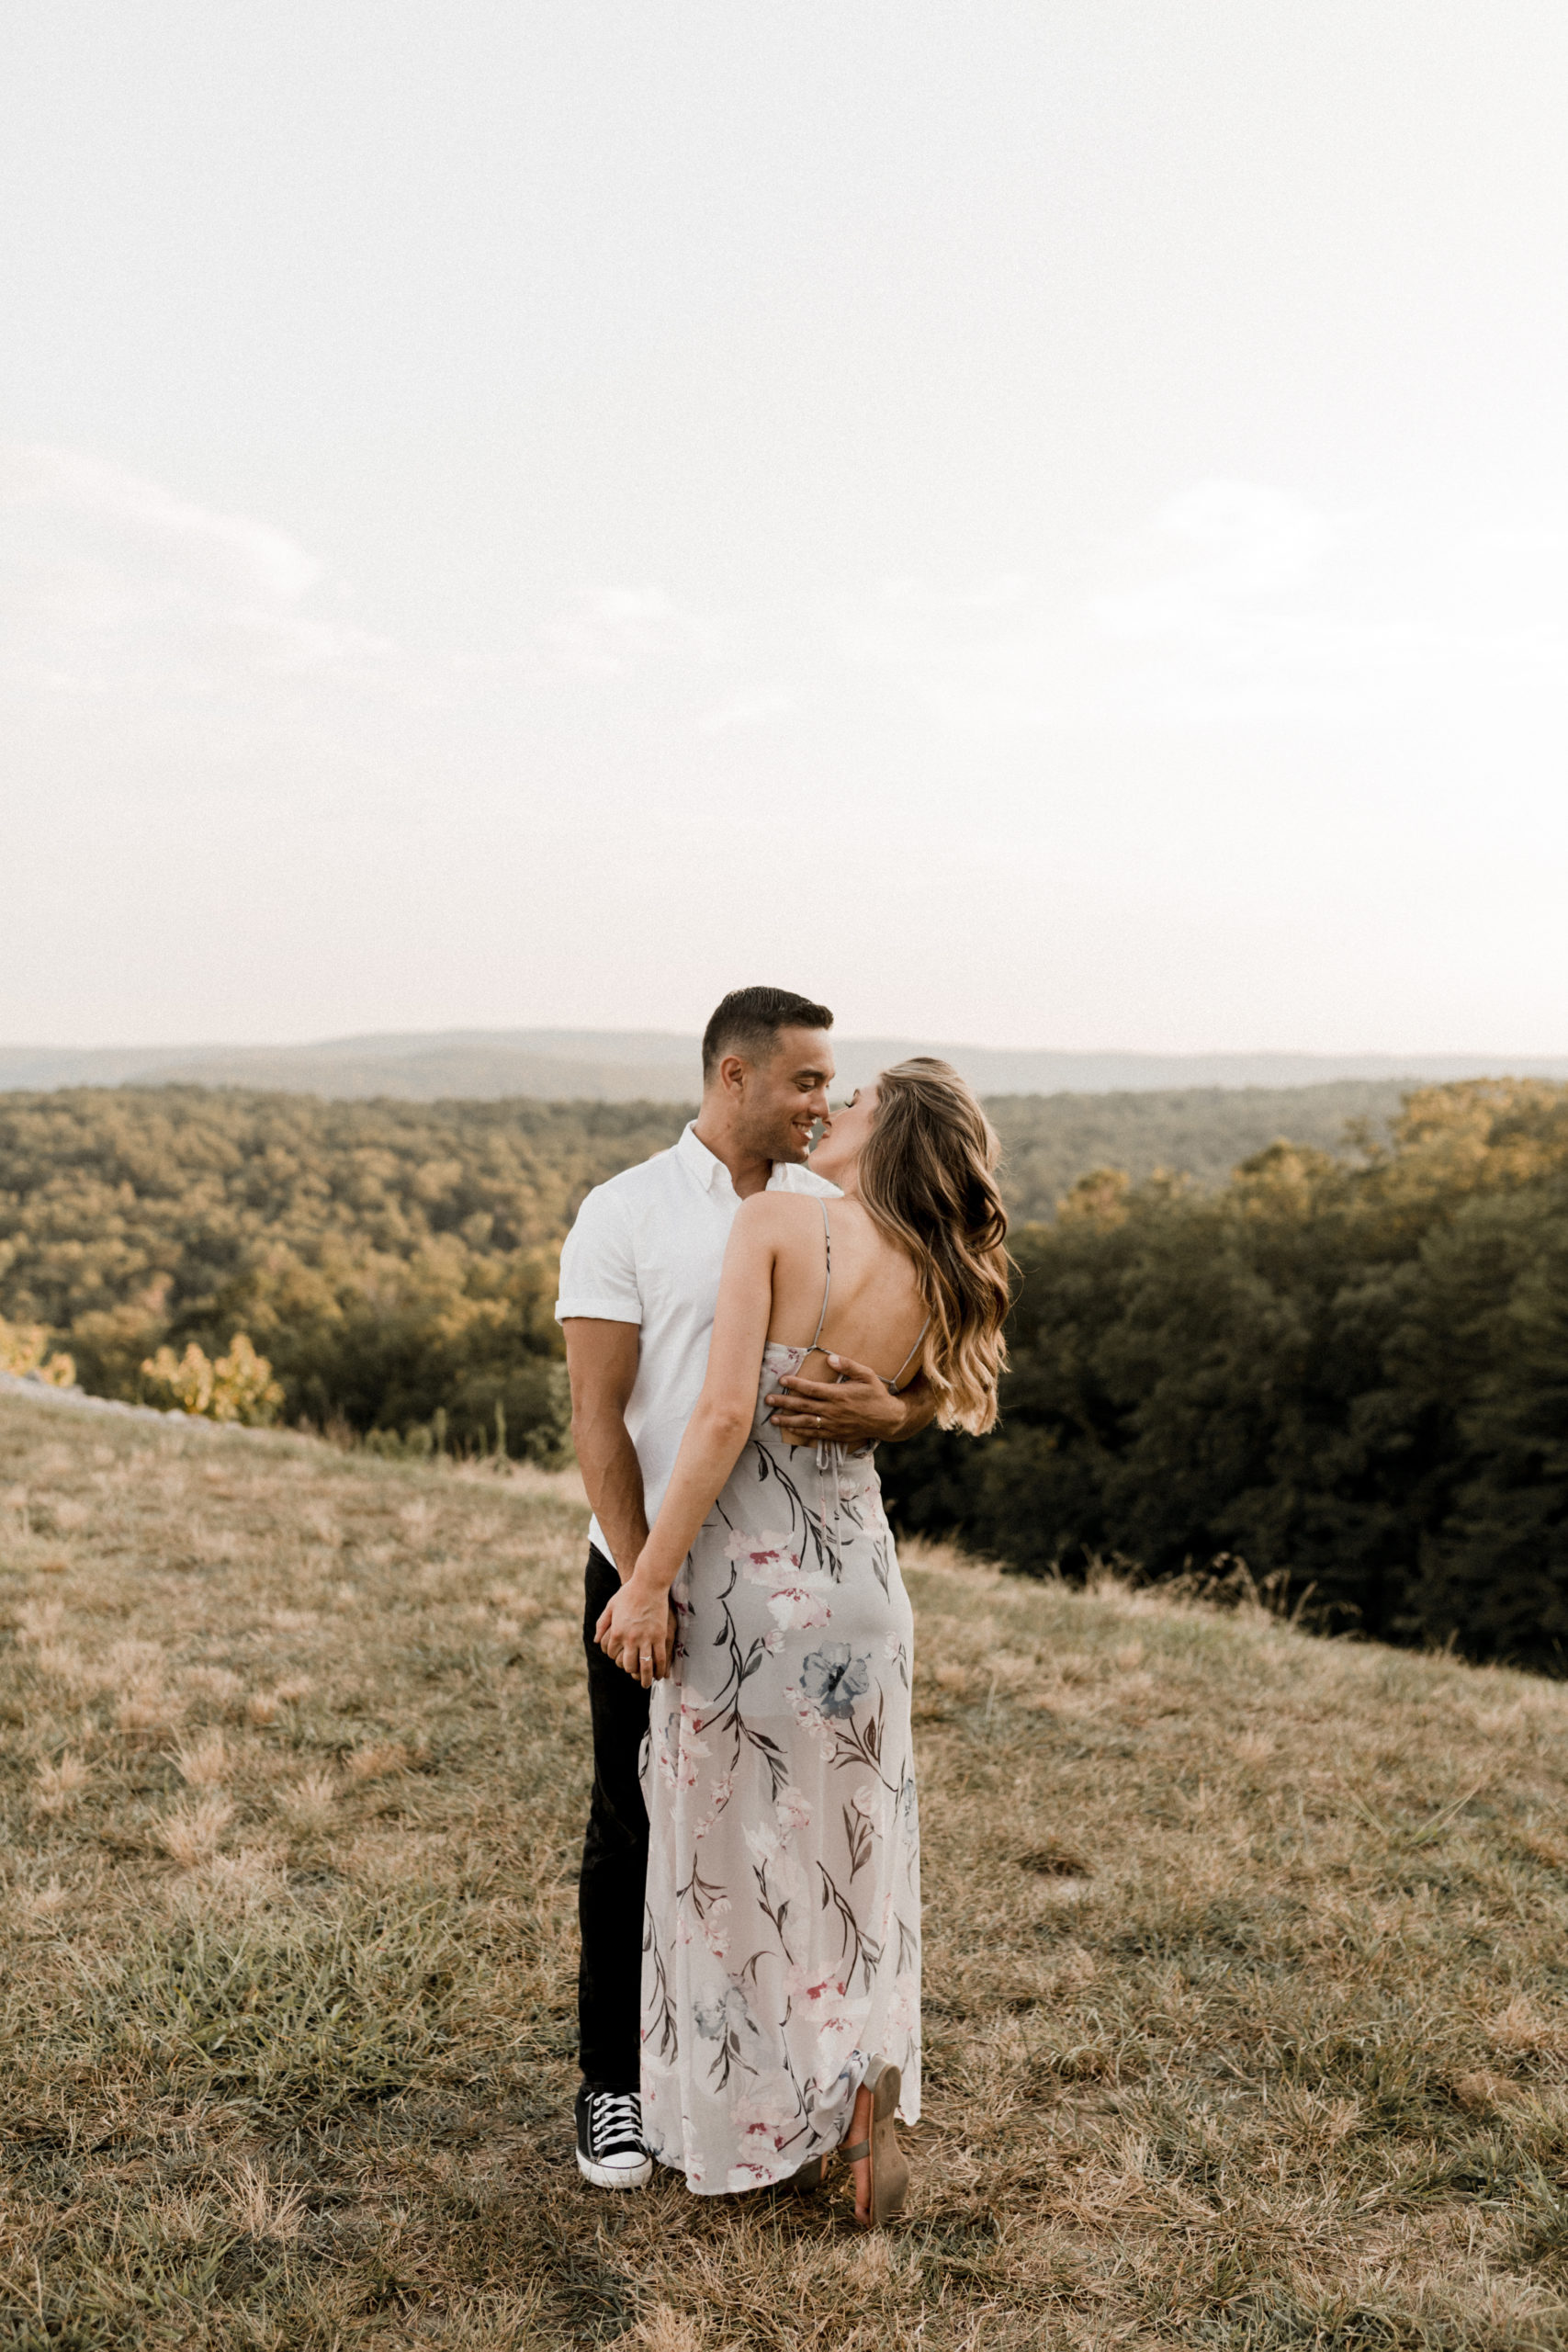 Engagement session on Raccoon Mountain, Tennessee